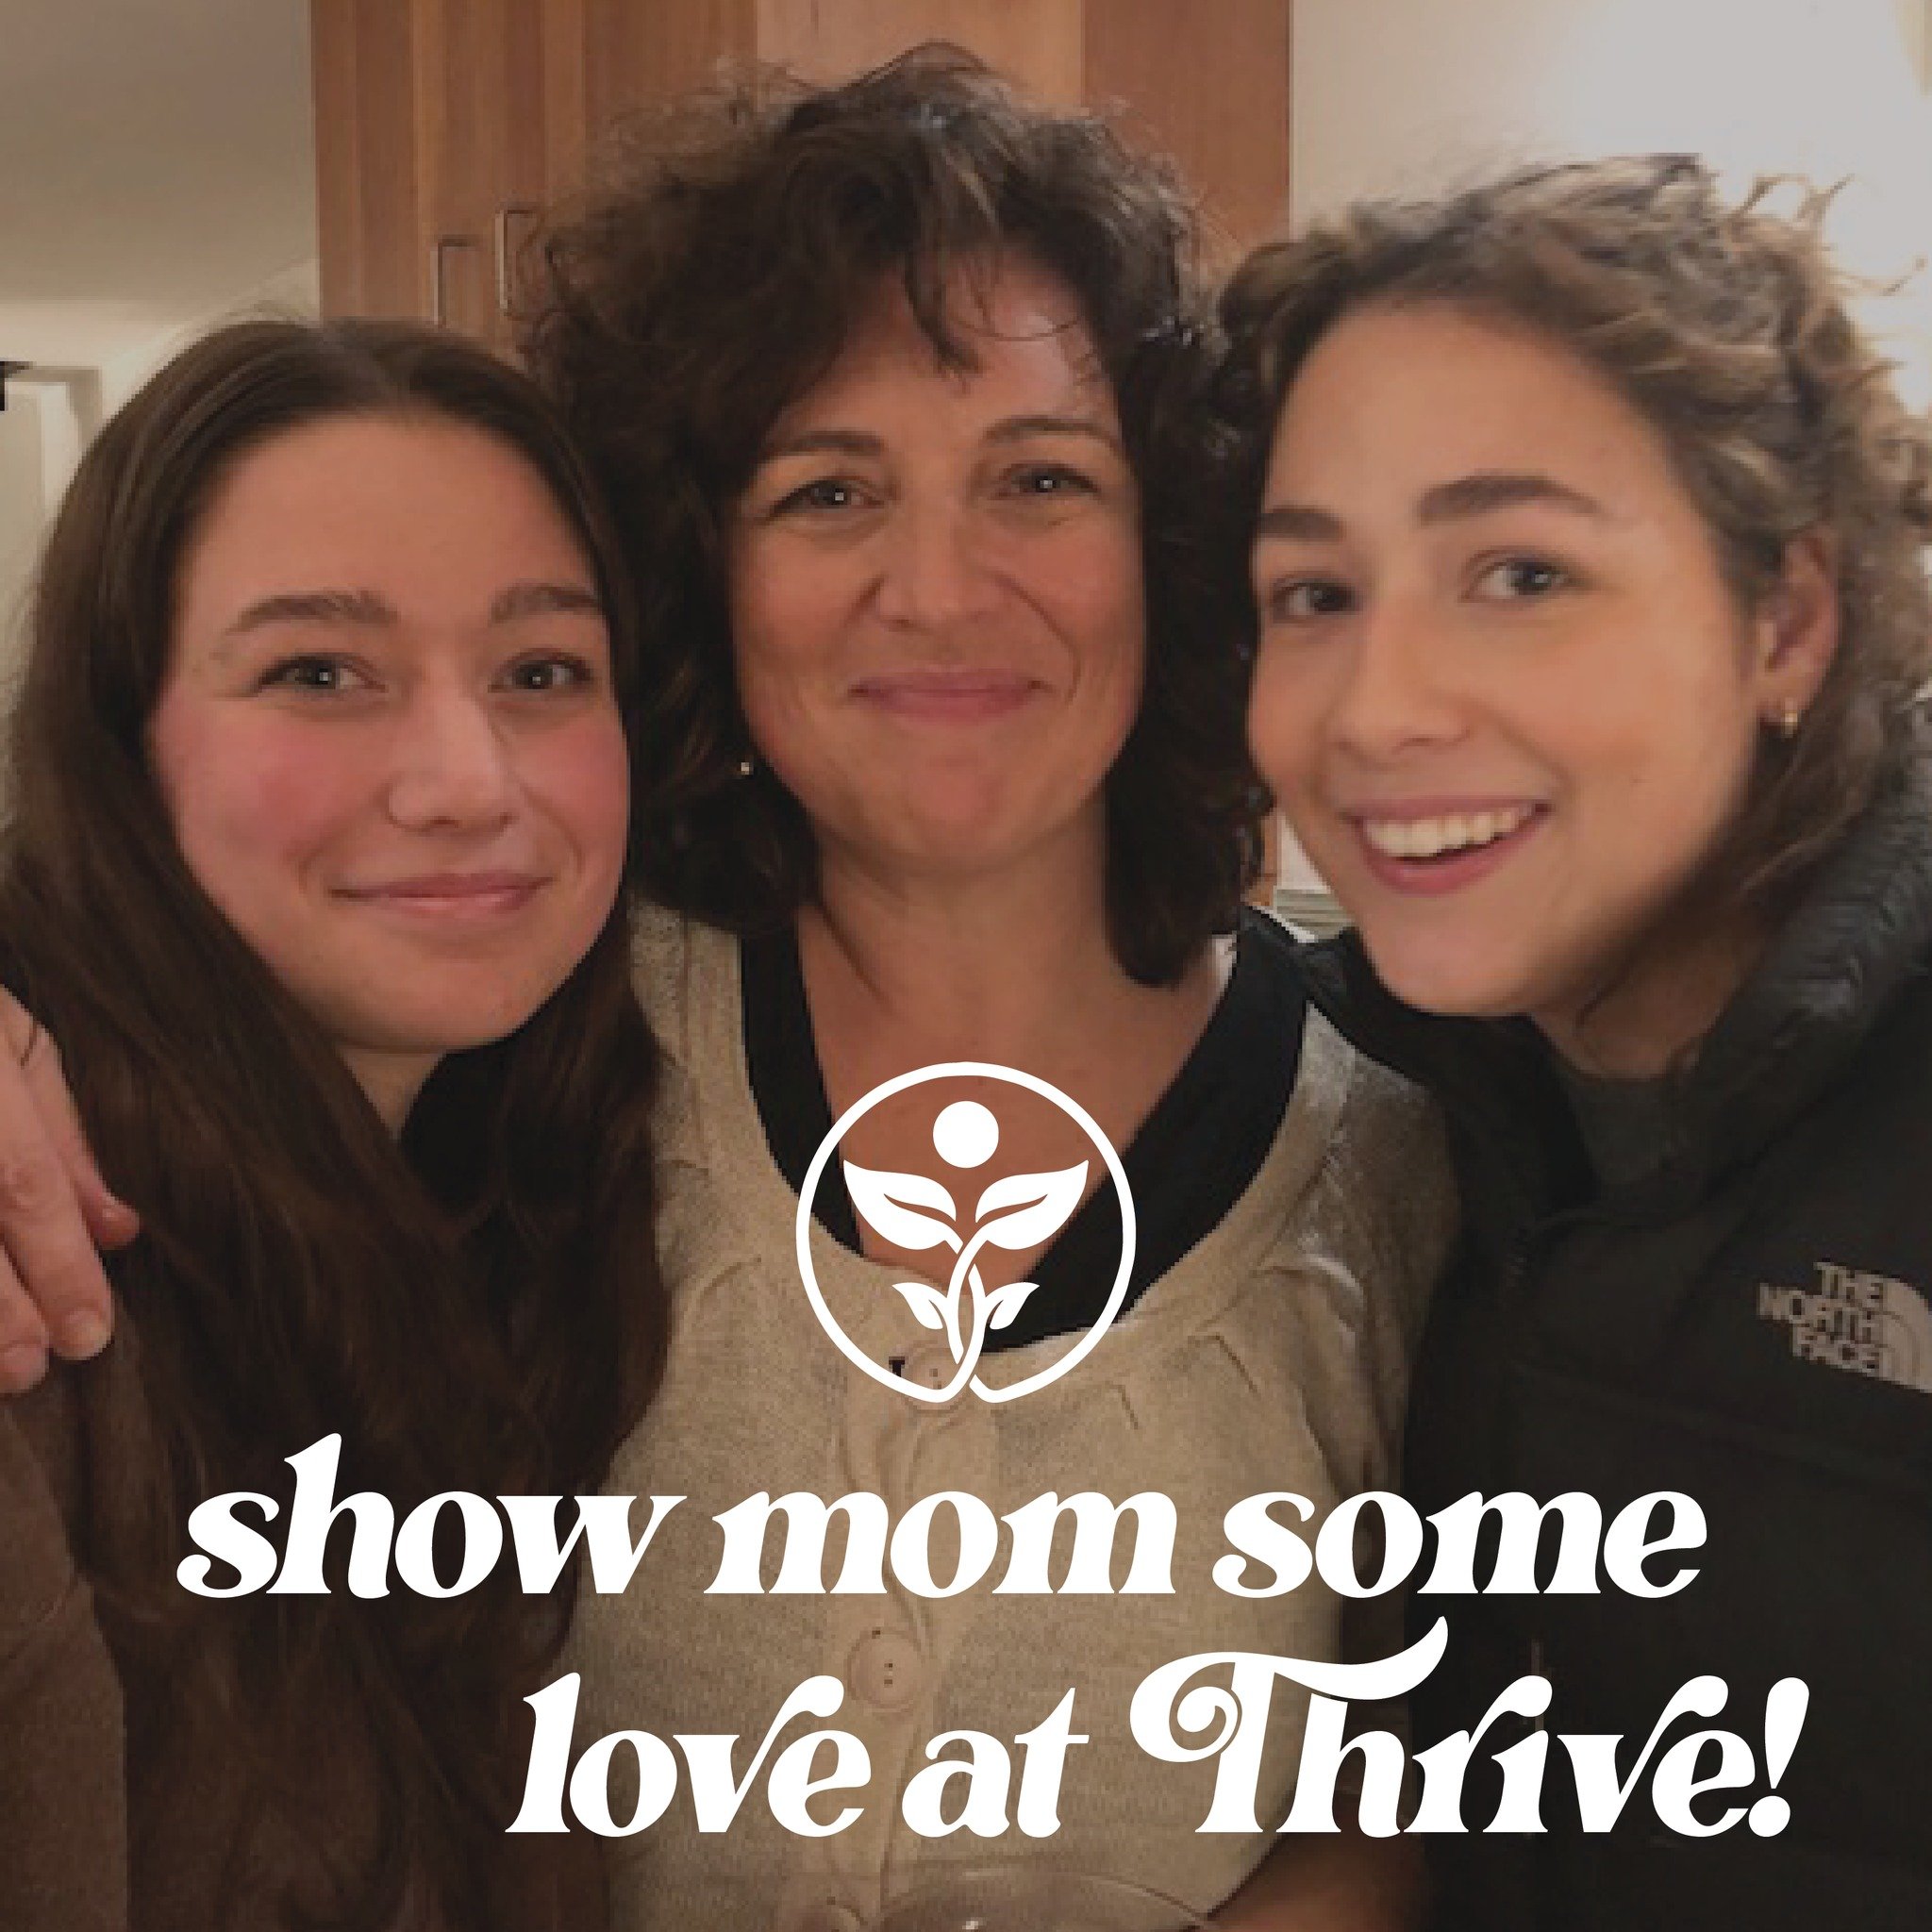 ****Special Mother's Day Offers****

This Mother's Day, give mom the gift of relaxation and wellness! 

Every mom deserves a pause for self-care - but how often does she truly get it?

Show mom love with the ultimate rejuvenating experience with a ma